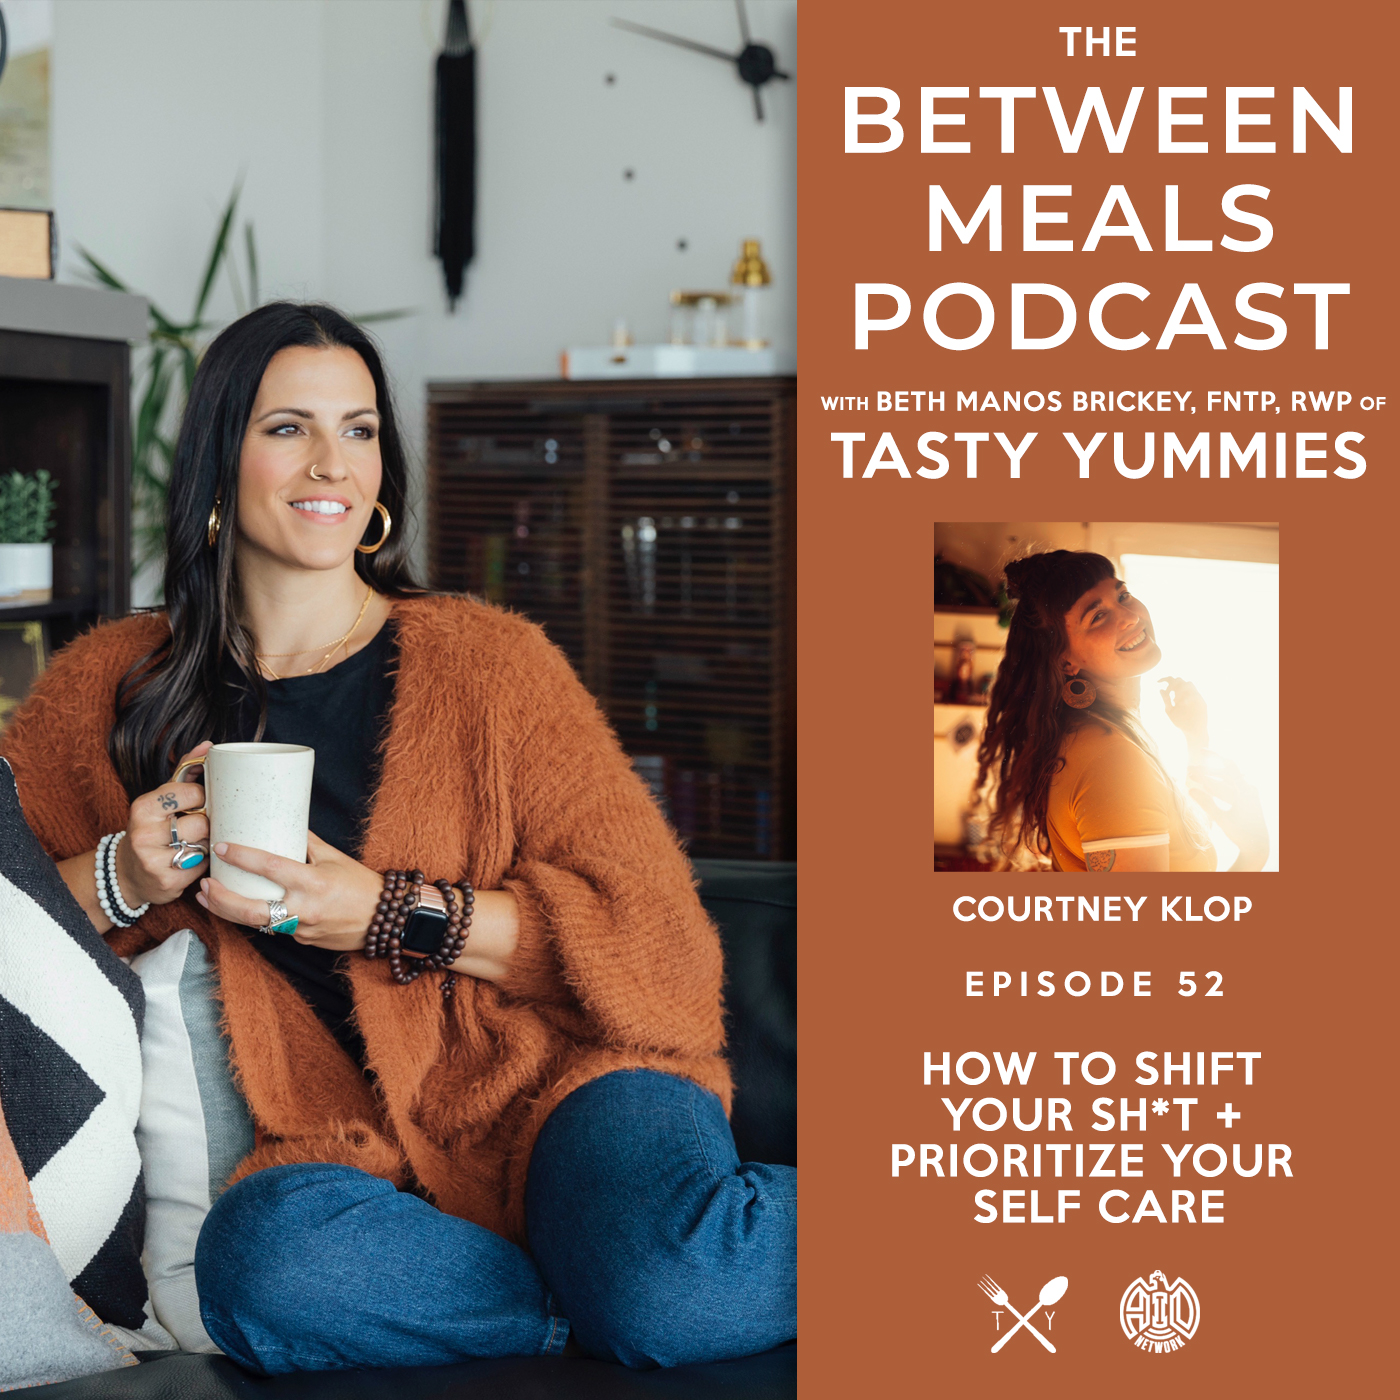 Between Meals Podcast. Episode 52: How to Shift Your Sh*t and Prioritize Your Self Care